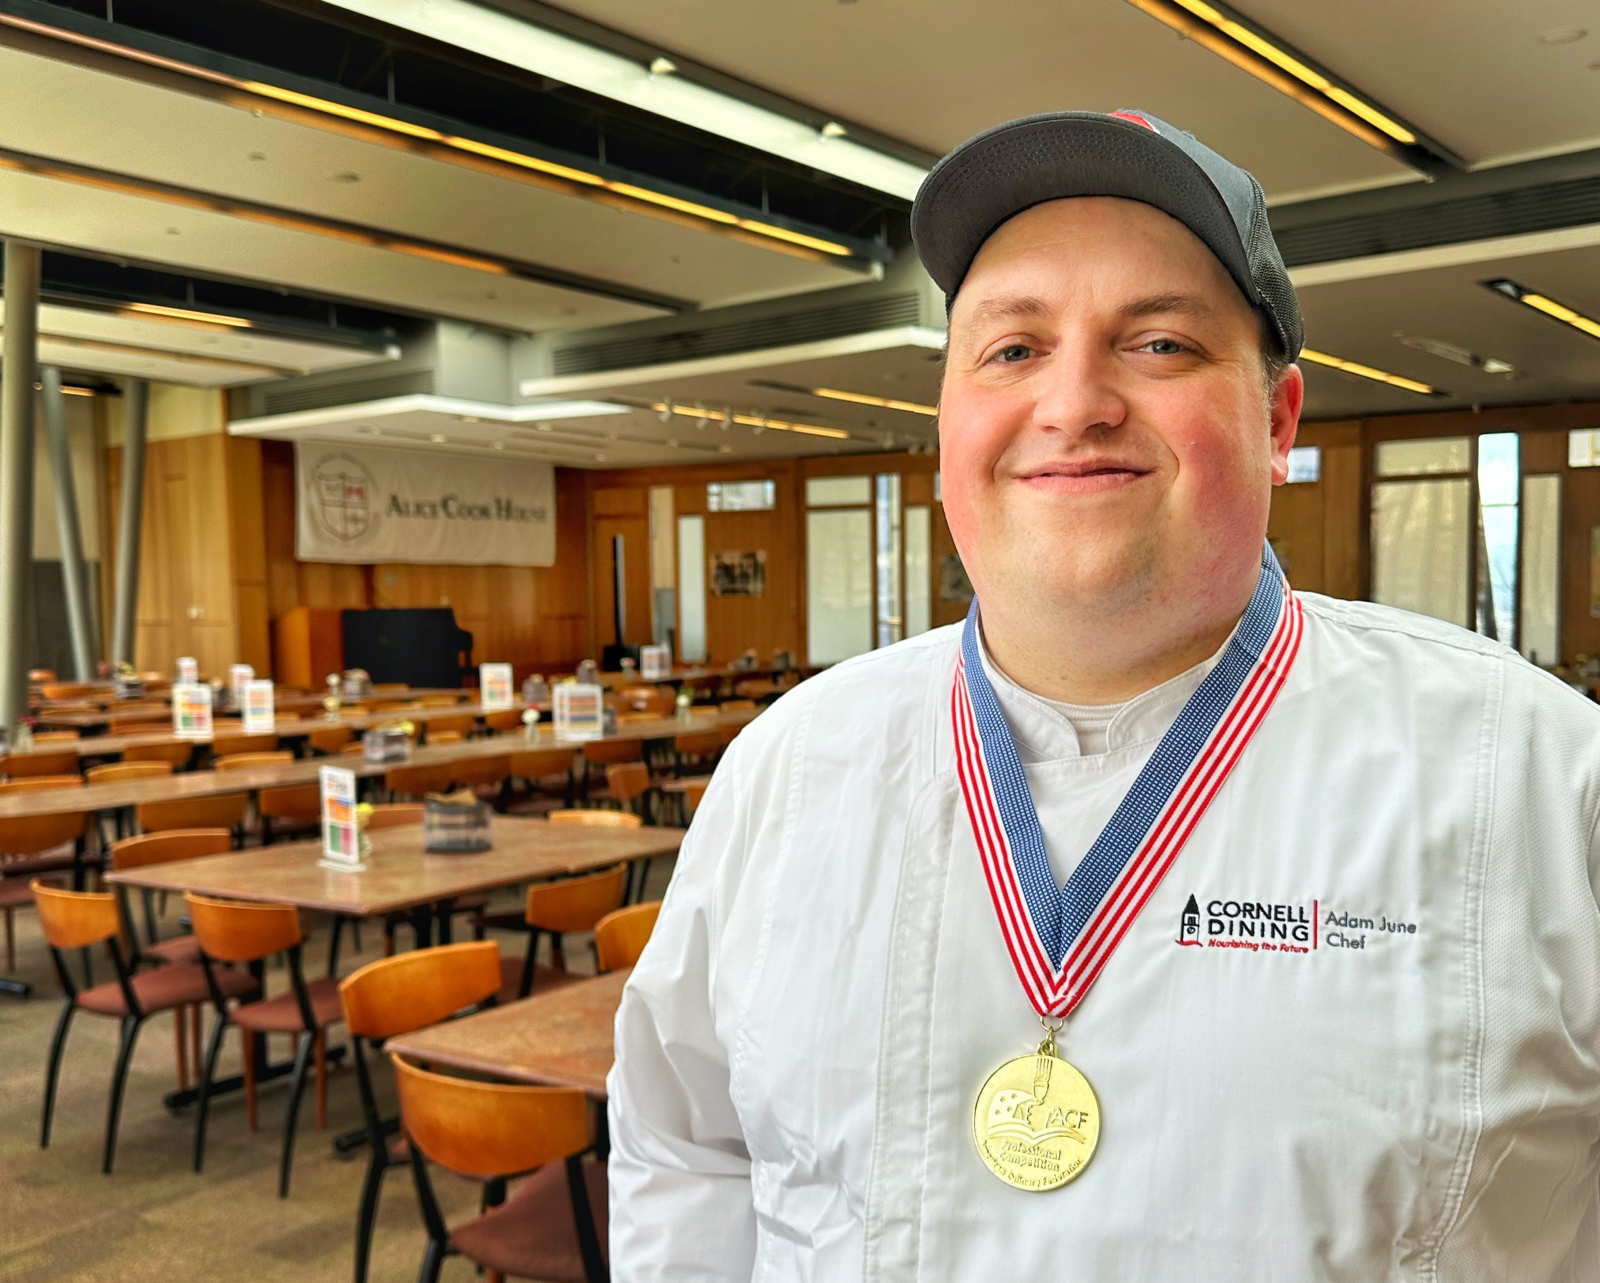 A smiling chef stands in front of a residential dining room wearing a chef coat, a cap, and a gold medal on a ribbon around his neck